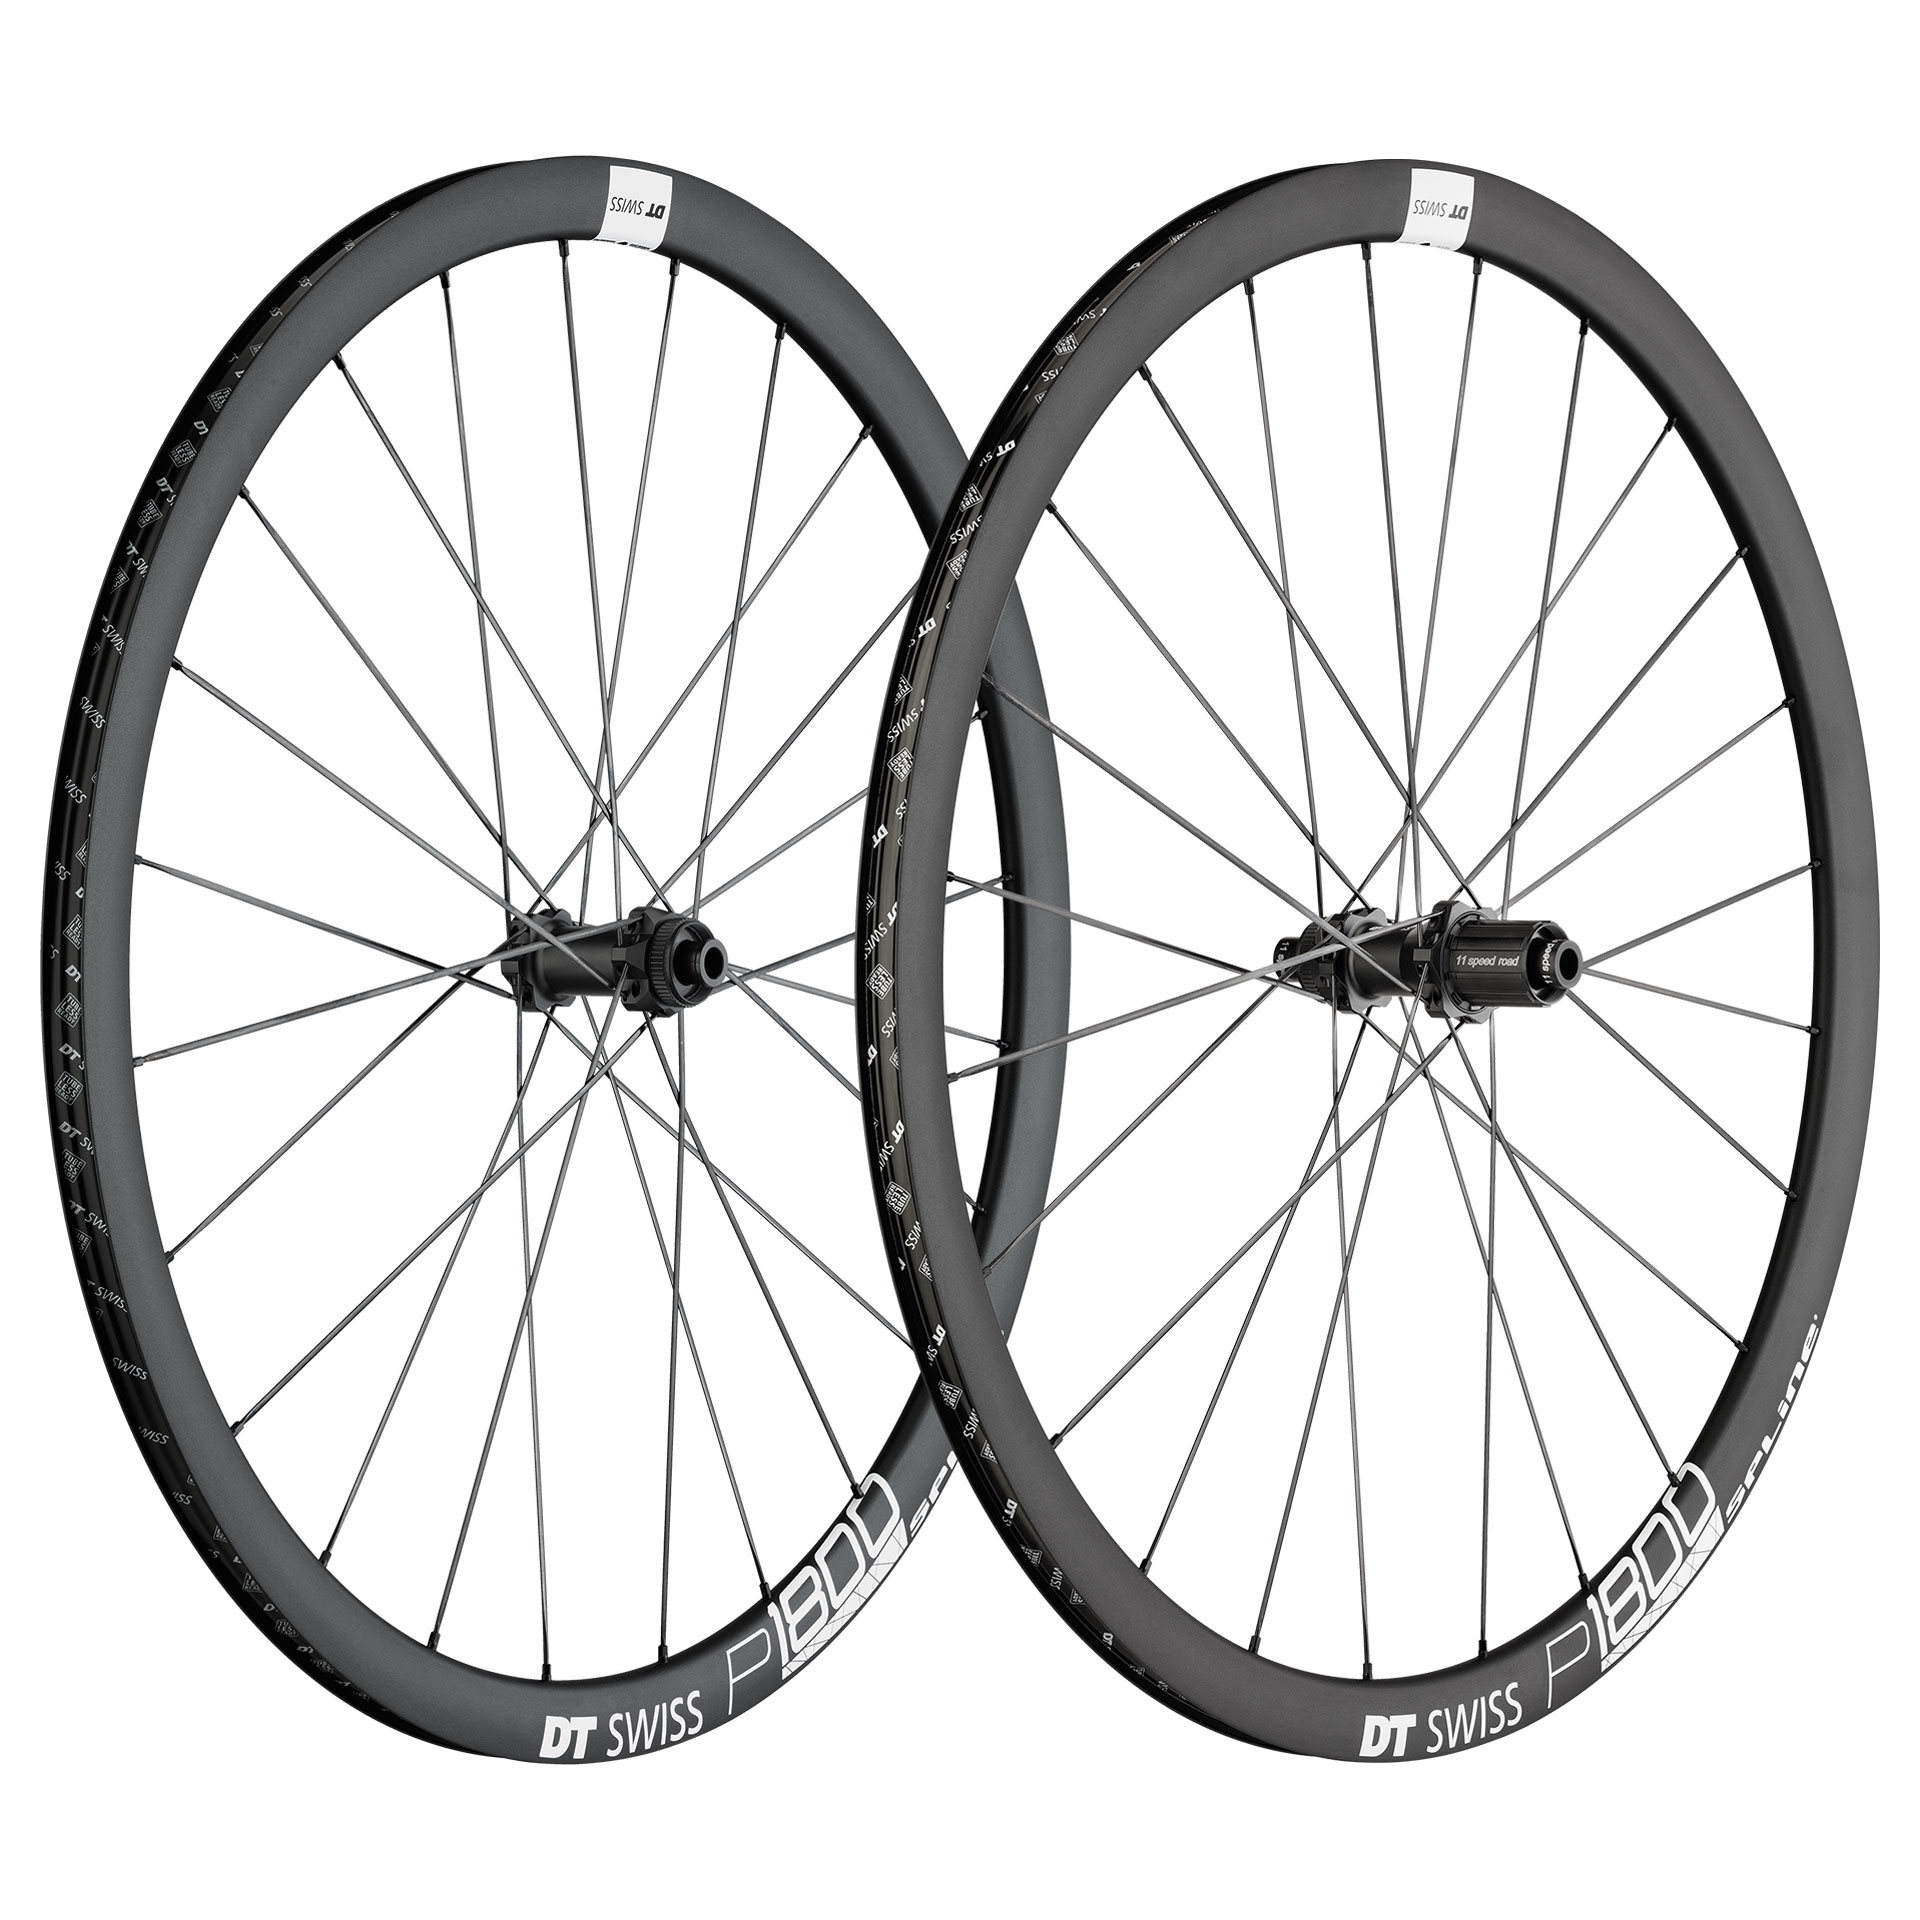 P 1800 SPLINE - Budget Road Wheels in Trusted Quality | DT Swiss